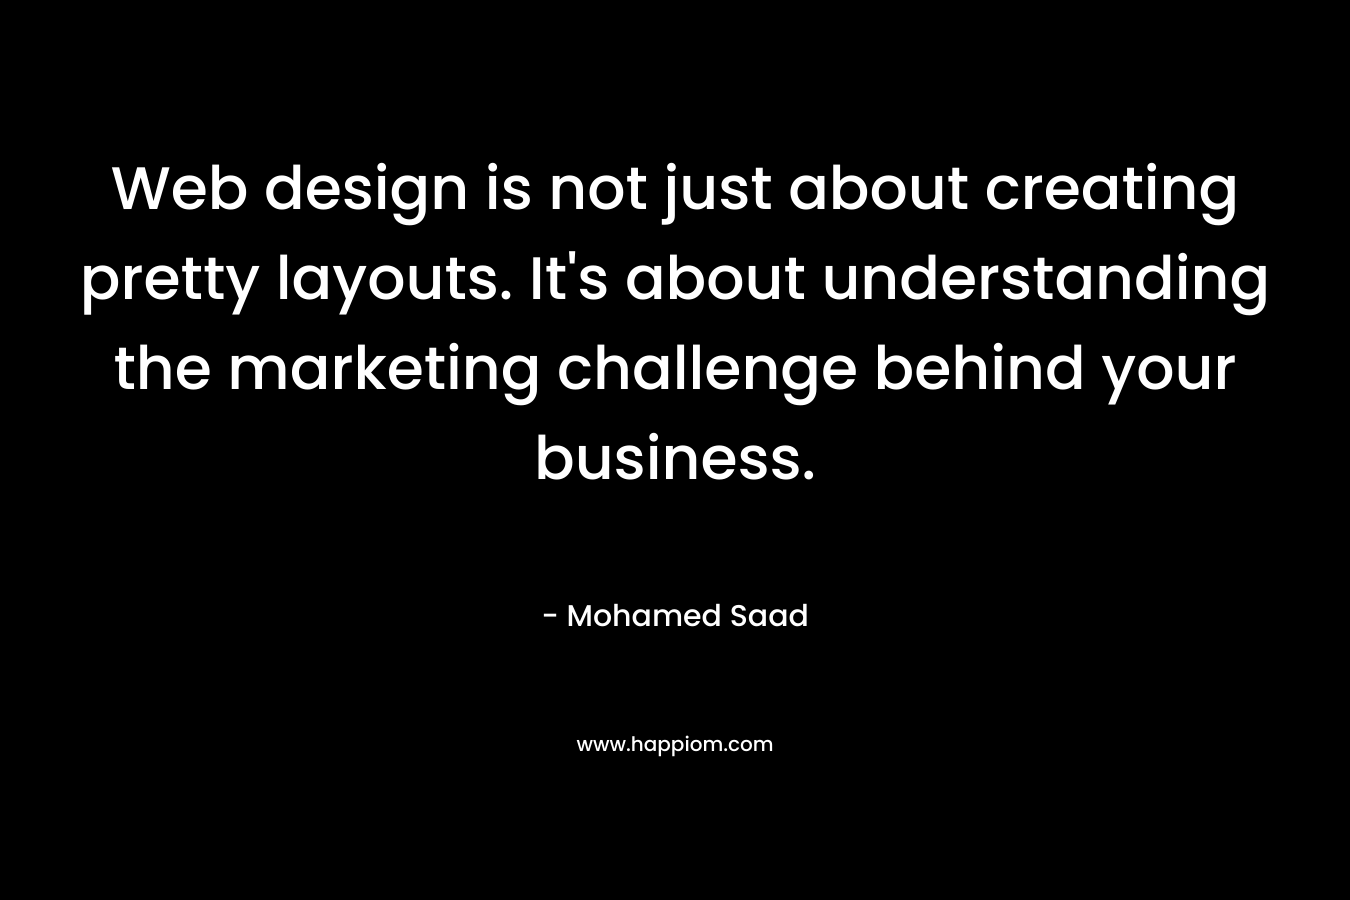 Web design is not just about creating pretty layouts. It’s about understanding the marketing challenge behind your business. – Mohamed Saad